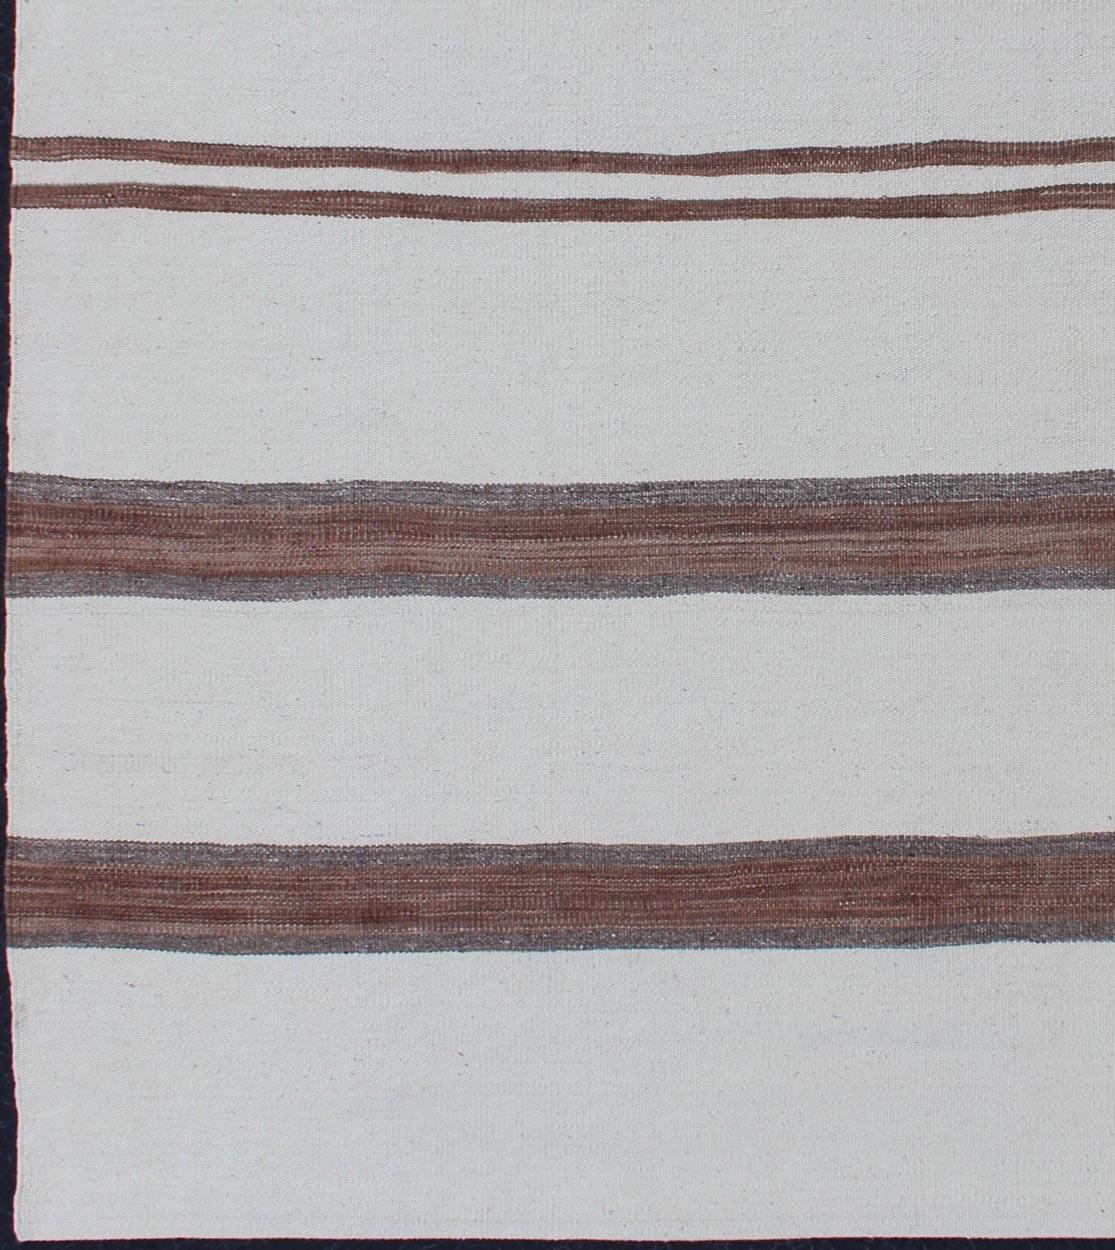 Turkish Vintage Kilim Flat-Weave Rug in Off White, Brown with Stripe Design For Sale 4